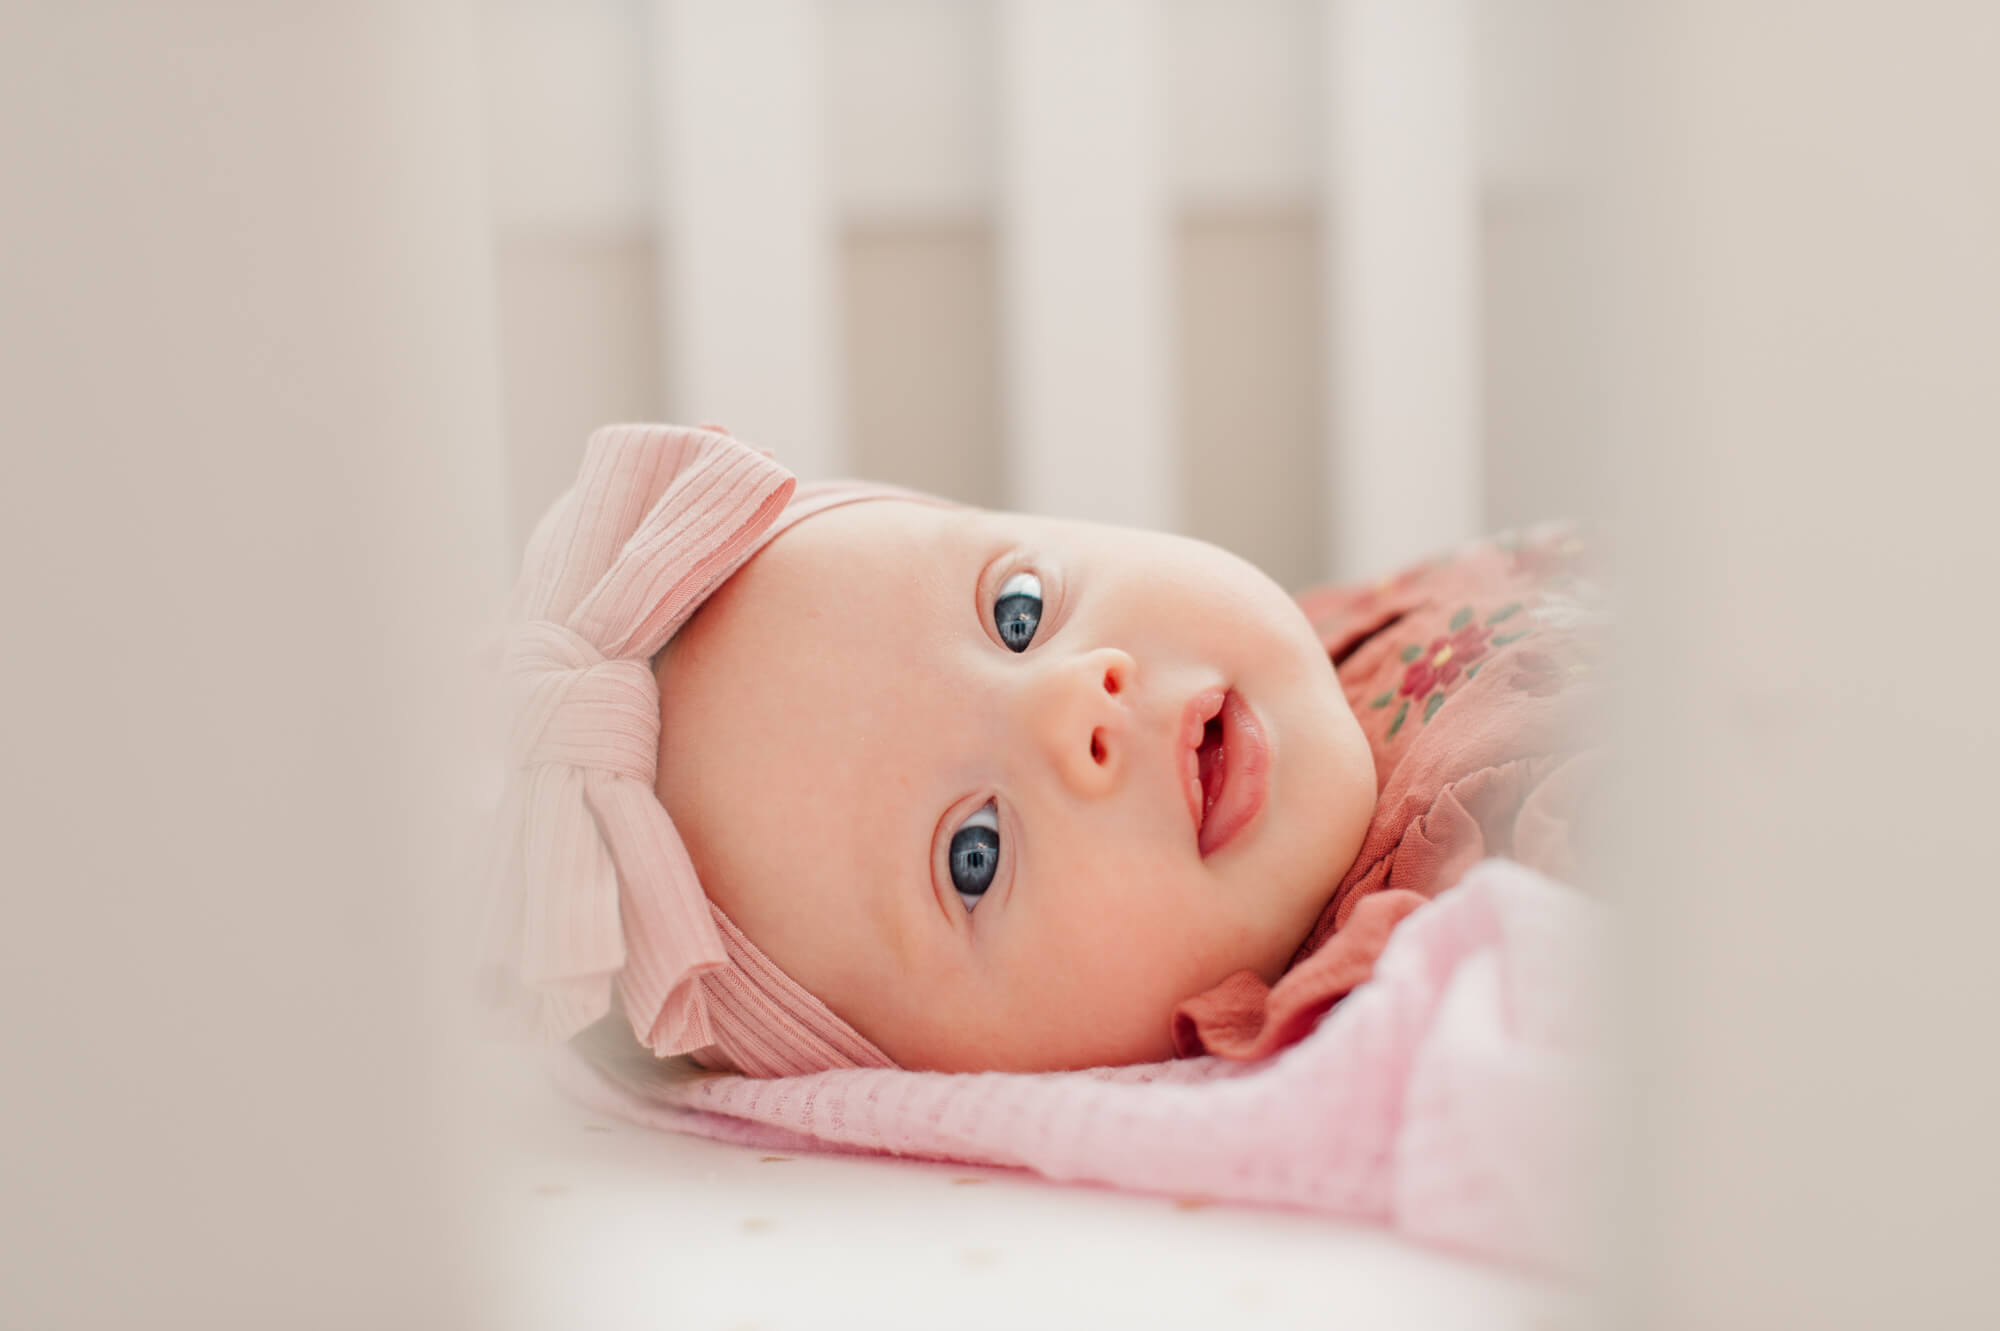 Newborn looks into the camera through the crib rails wearing all pink with bright blue eyes